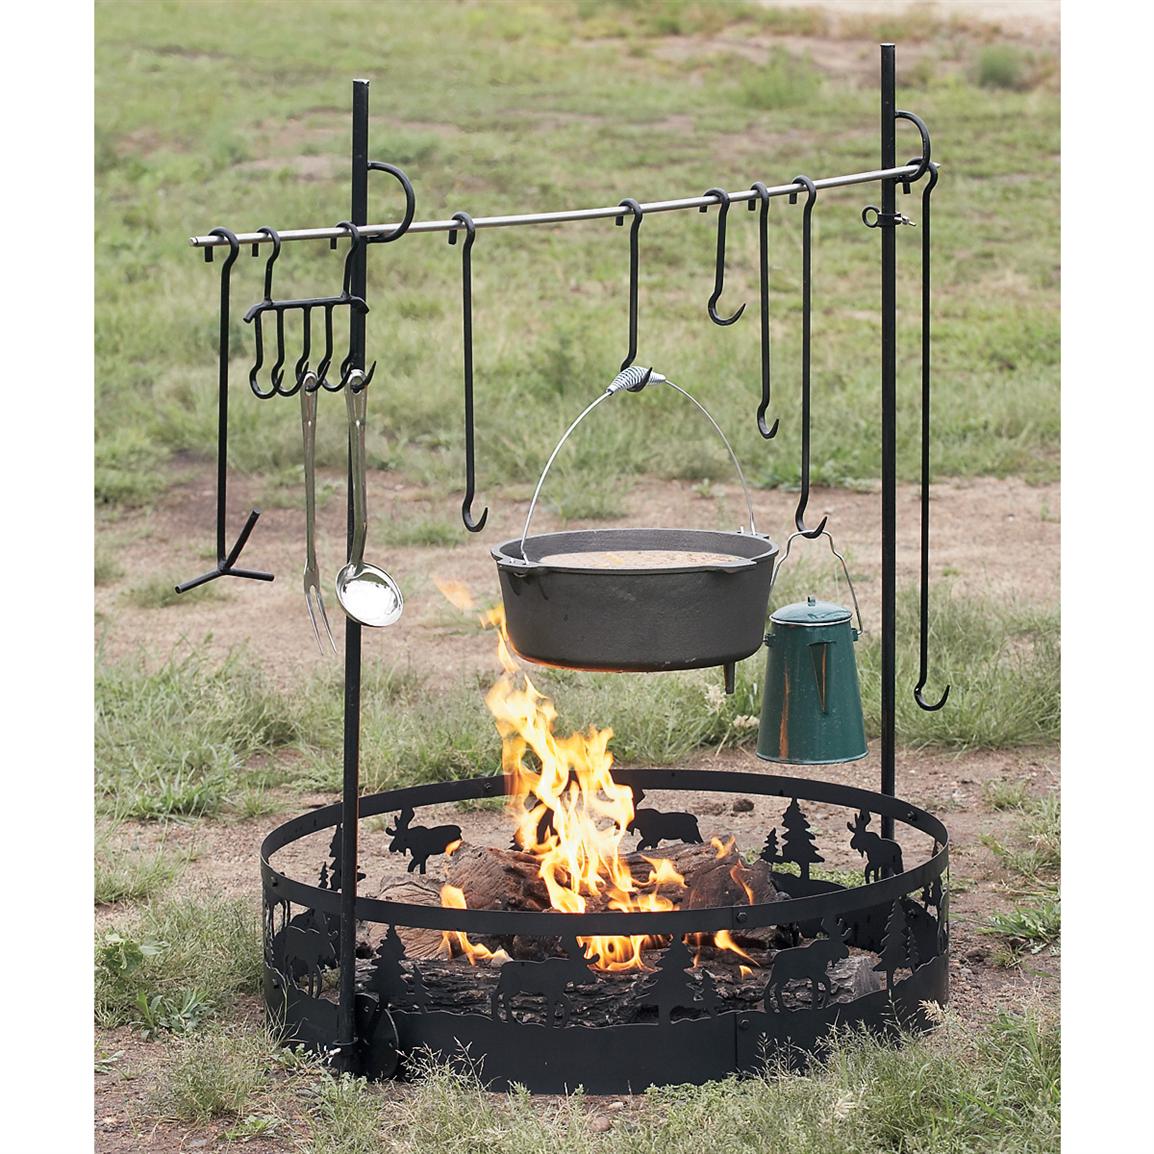 Guide Gear® Campfire Cook Set 126555 Cookware And Utensils At Sportsman S Guide